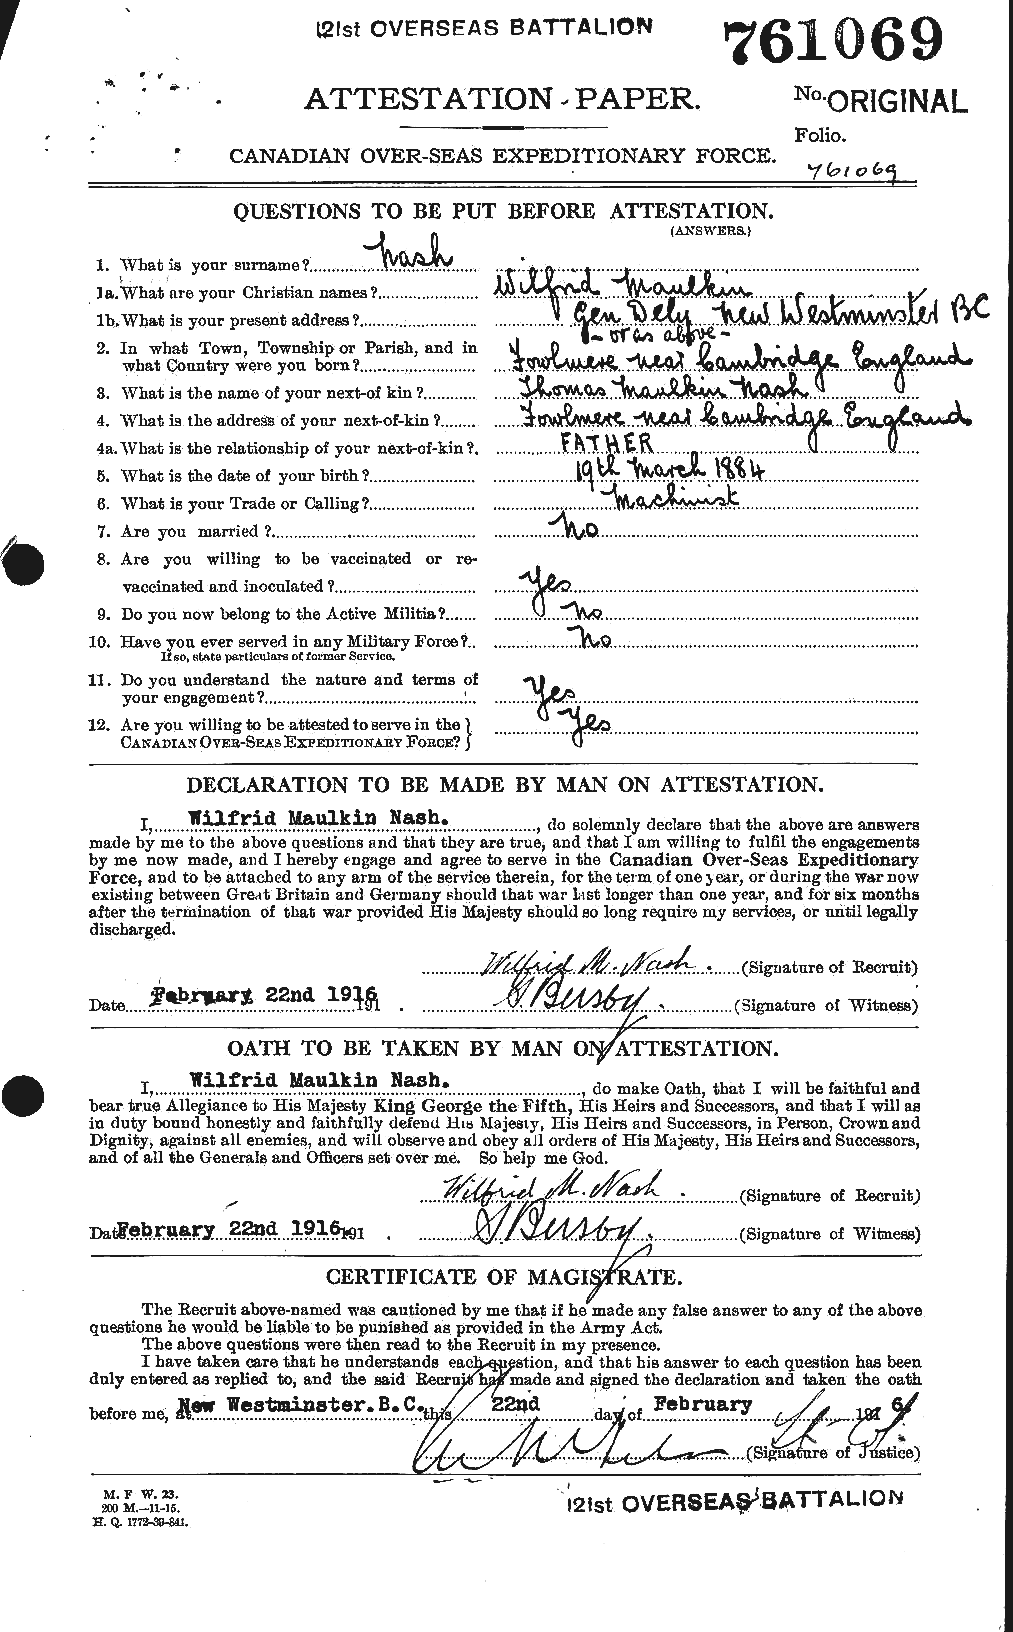 Personnel Records of the First World War - CEF 549065a